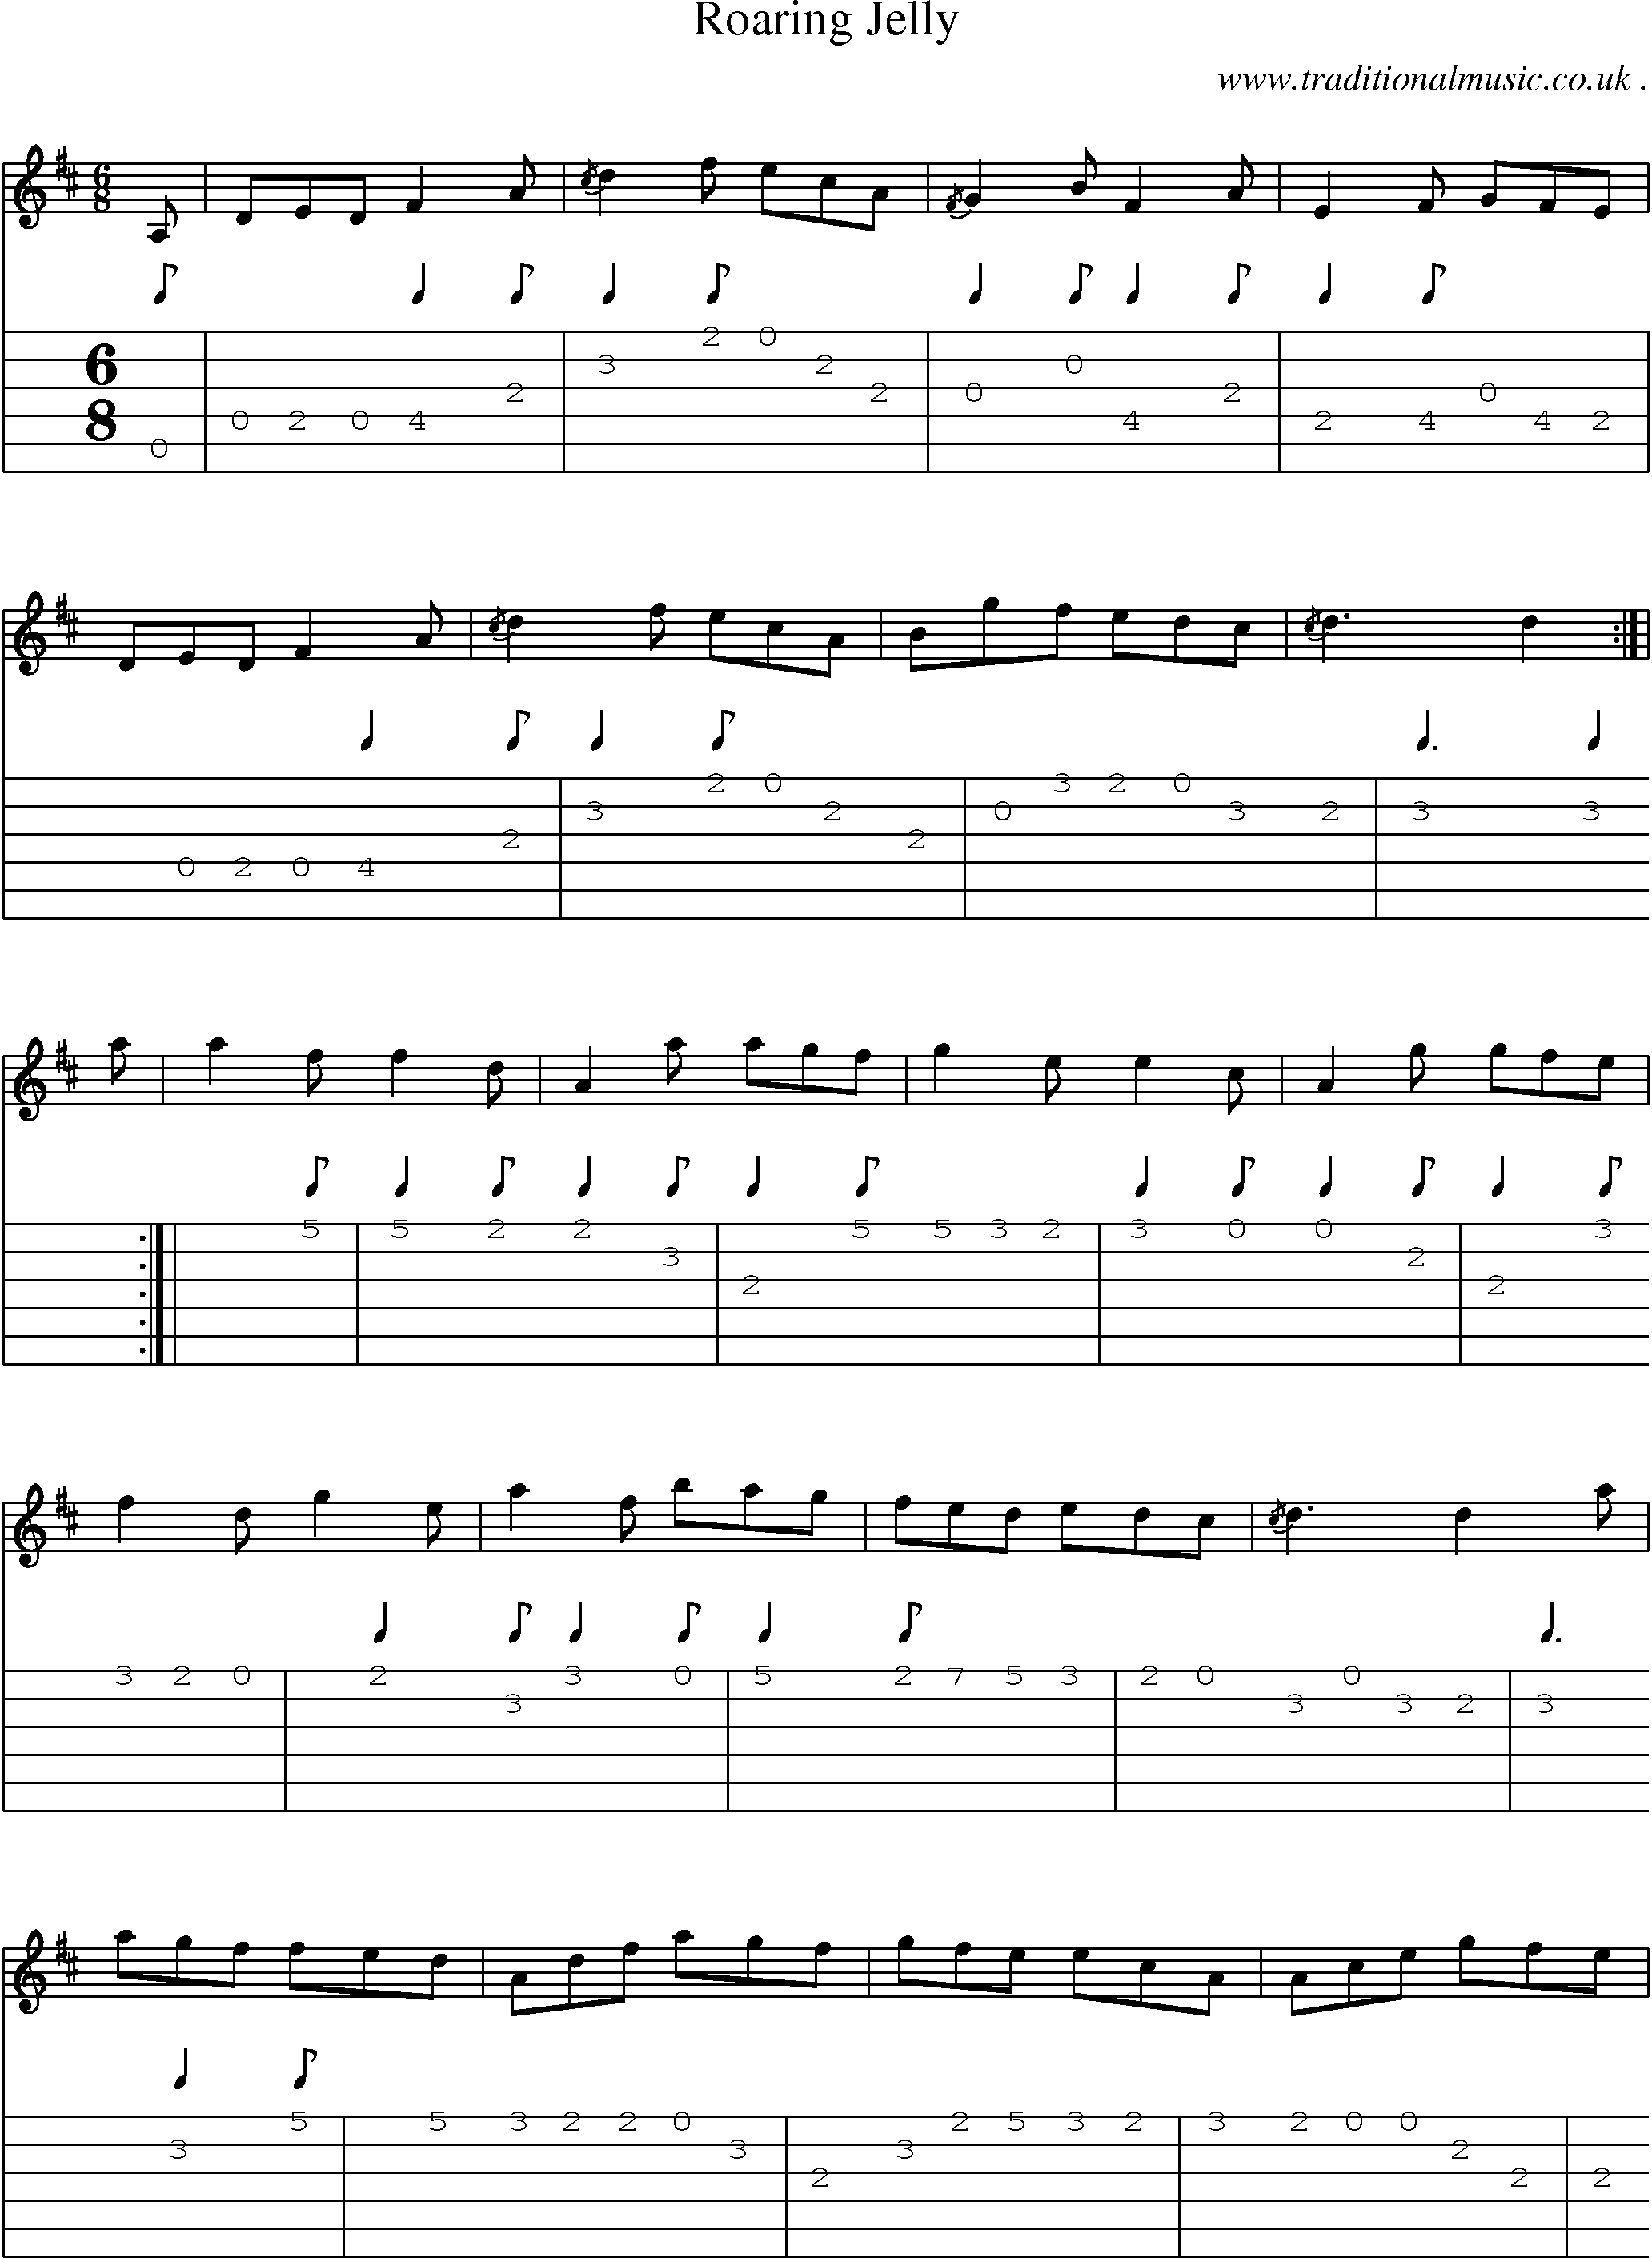 Sheet-music  score, Chords and Guitar Tabs for Roaring Jelly